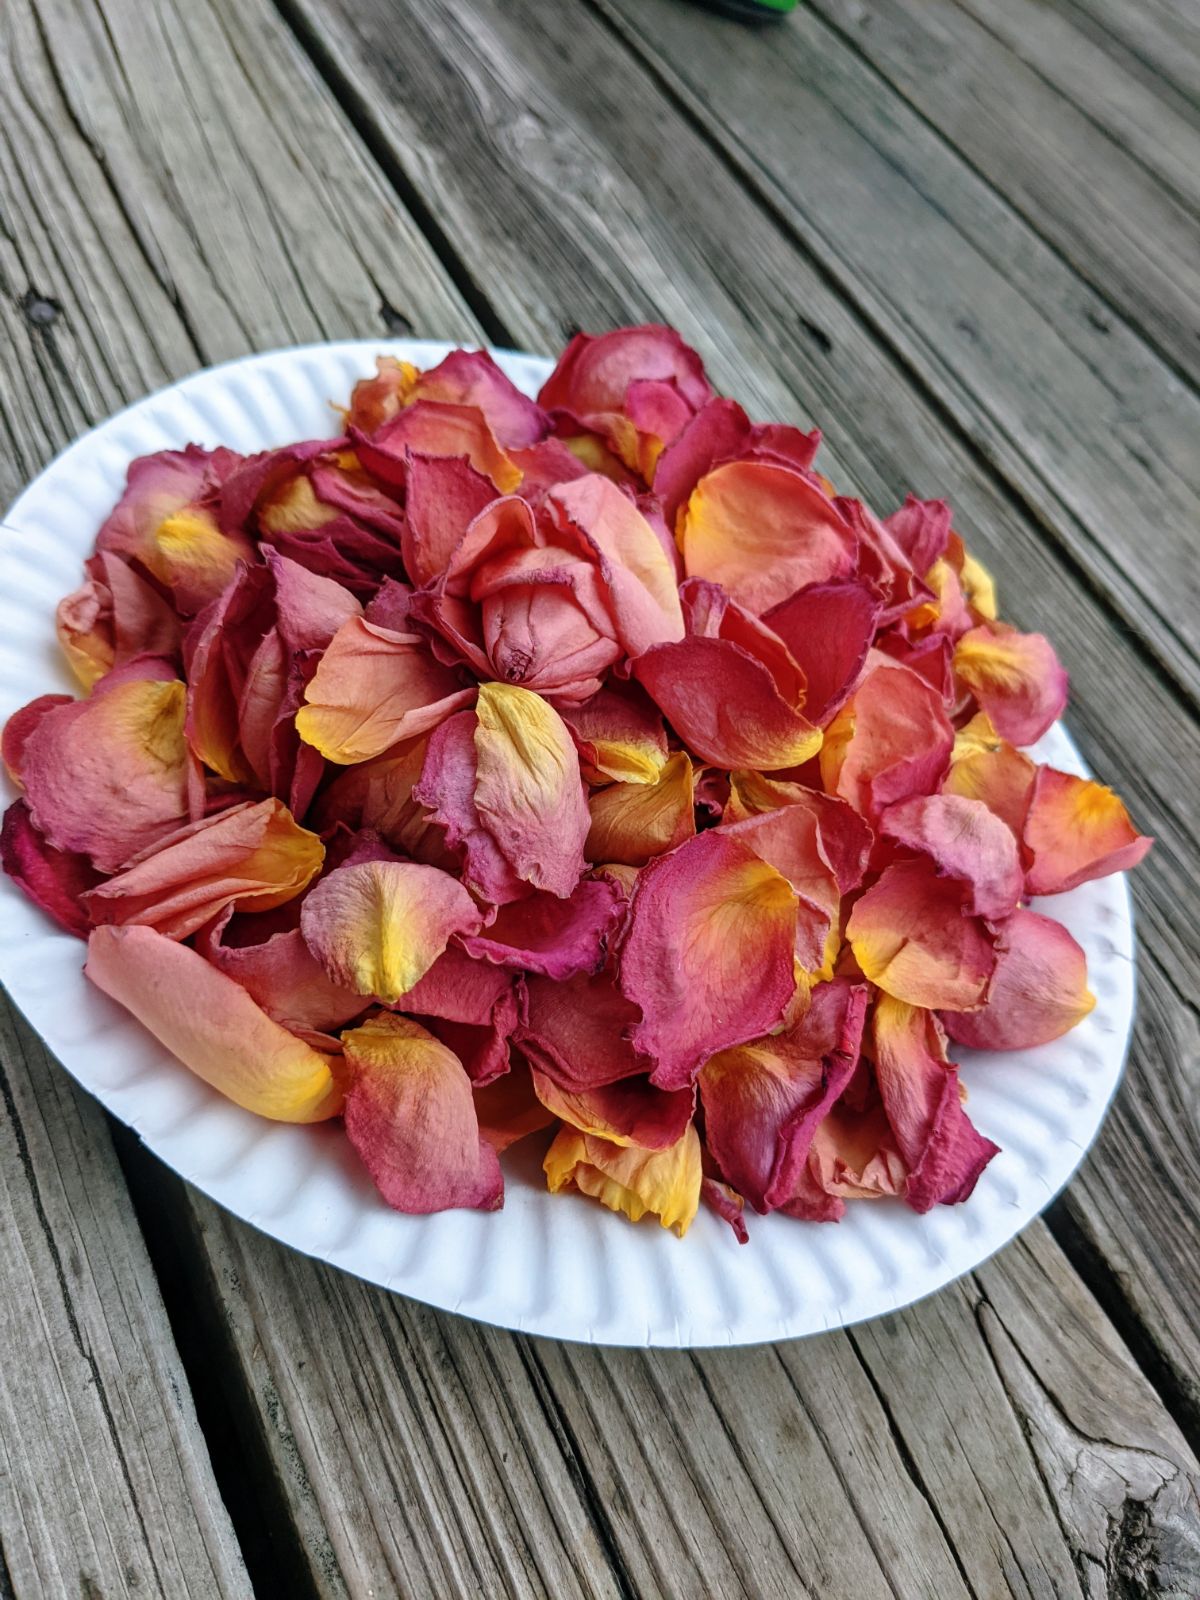 Beautiful pink and yellow rose petals on a white picnic paper plate on a wooden deck outside